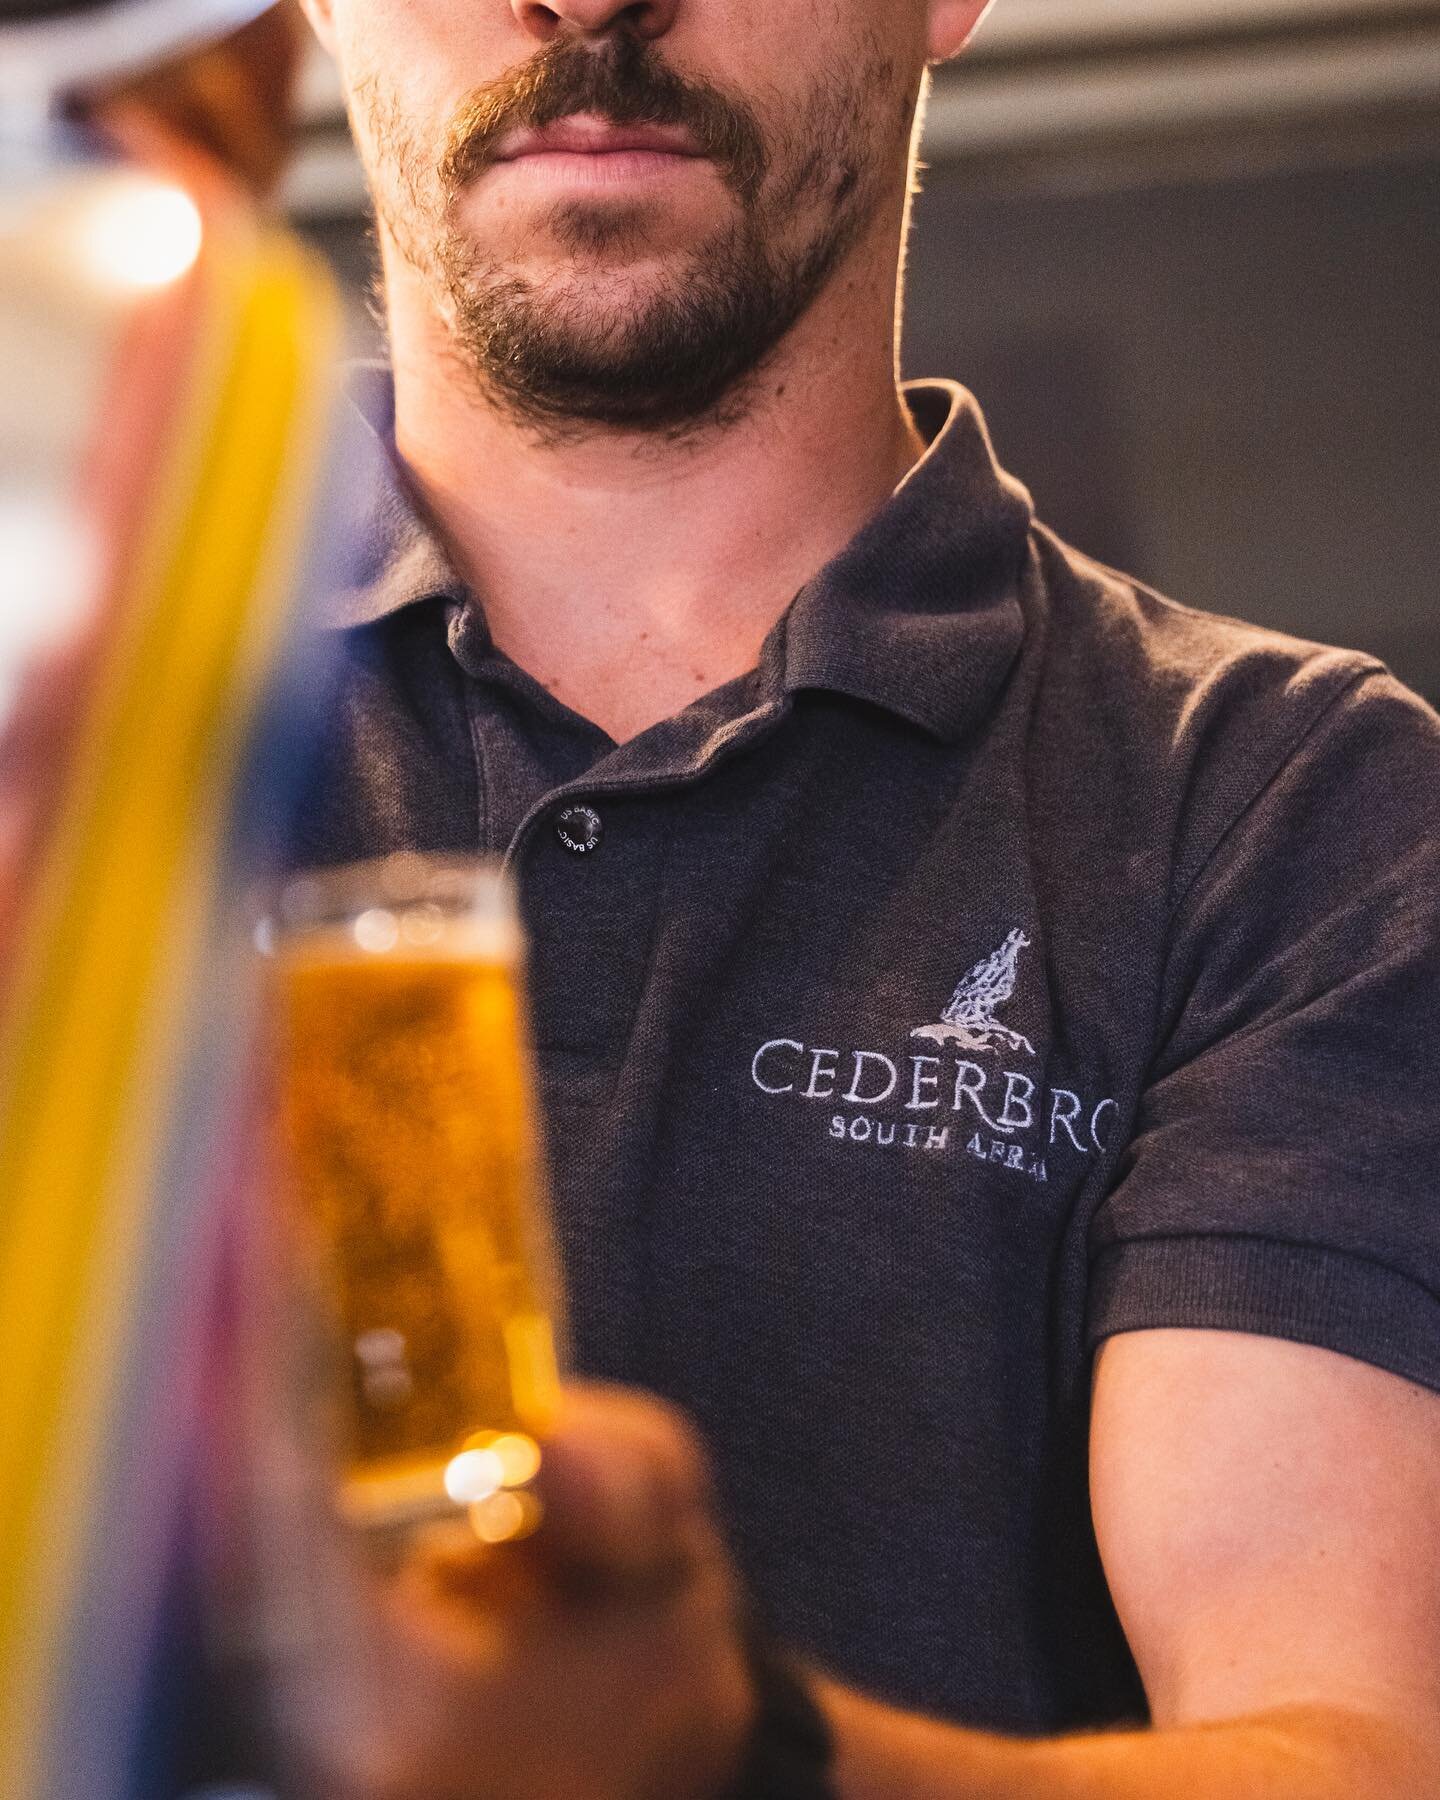 Gerrit Smit, our driving force behind the scenes - busy pouring a cold one. ☝️ 

At Cederberg Brewery, we're proud to be a small, tight-knit team of passionate beer lovers. 

You might also know him as Gert Koevert - a man who's not afraid to go the 